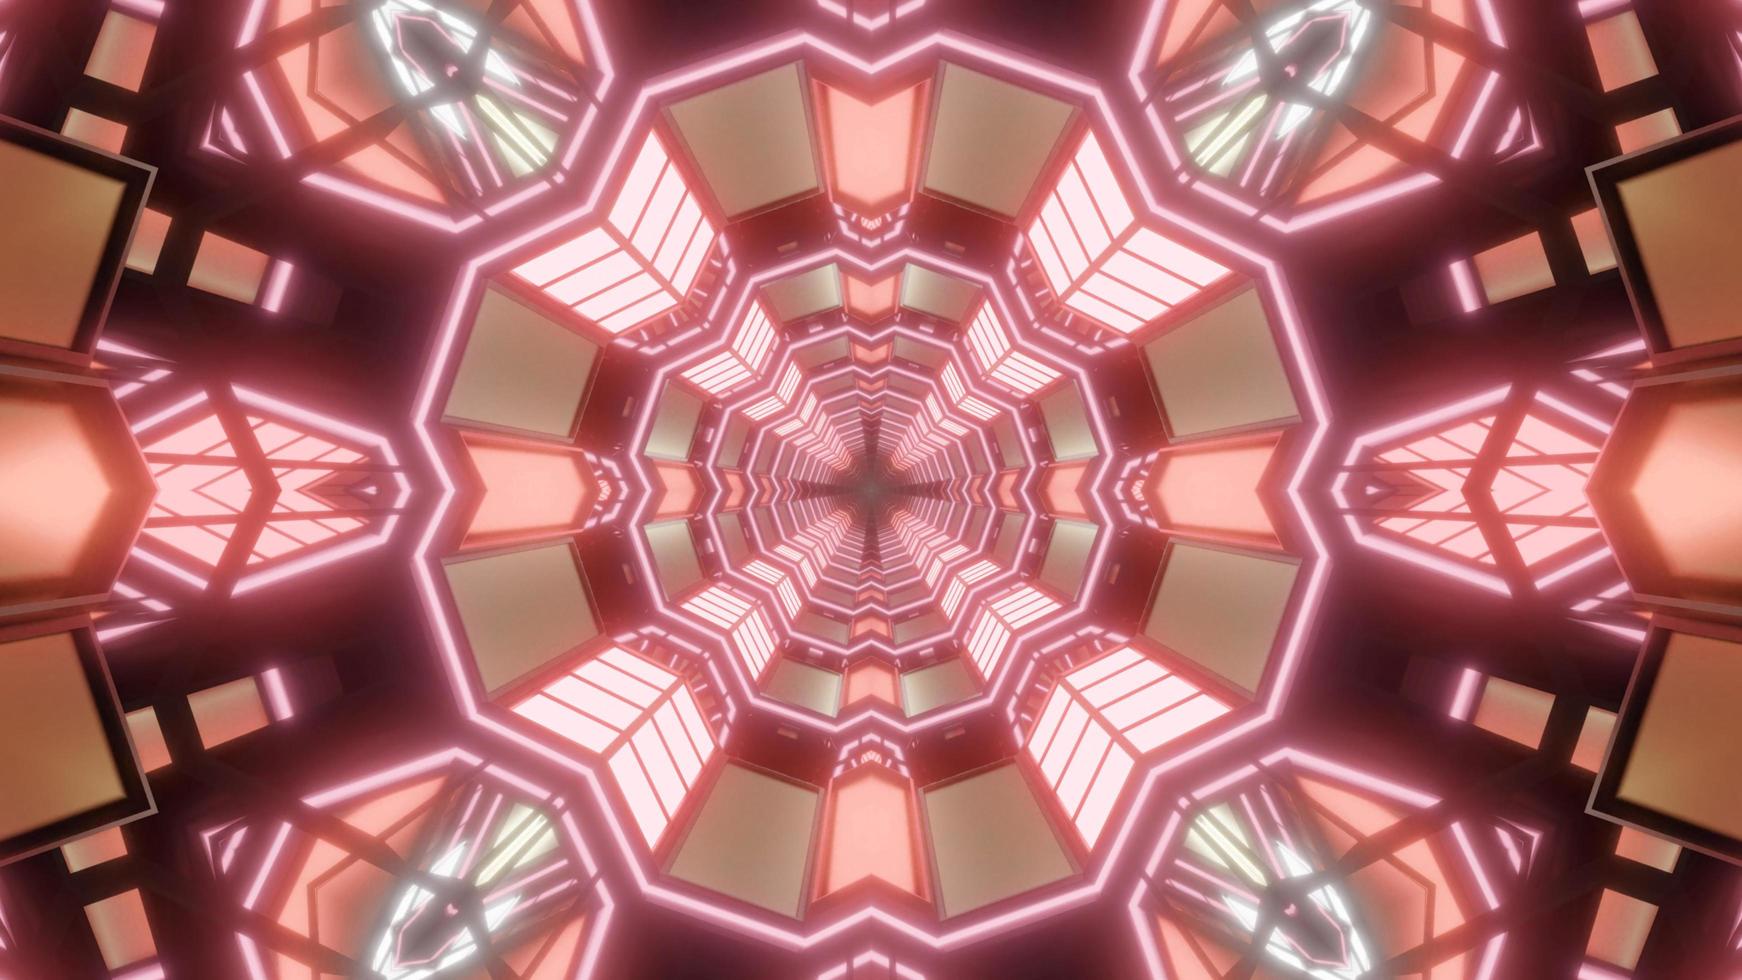 Red, orange, and white 3D tunnel kaleidoscope design illustration for background or wallpaper photo